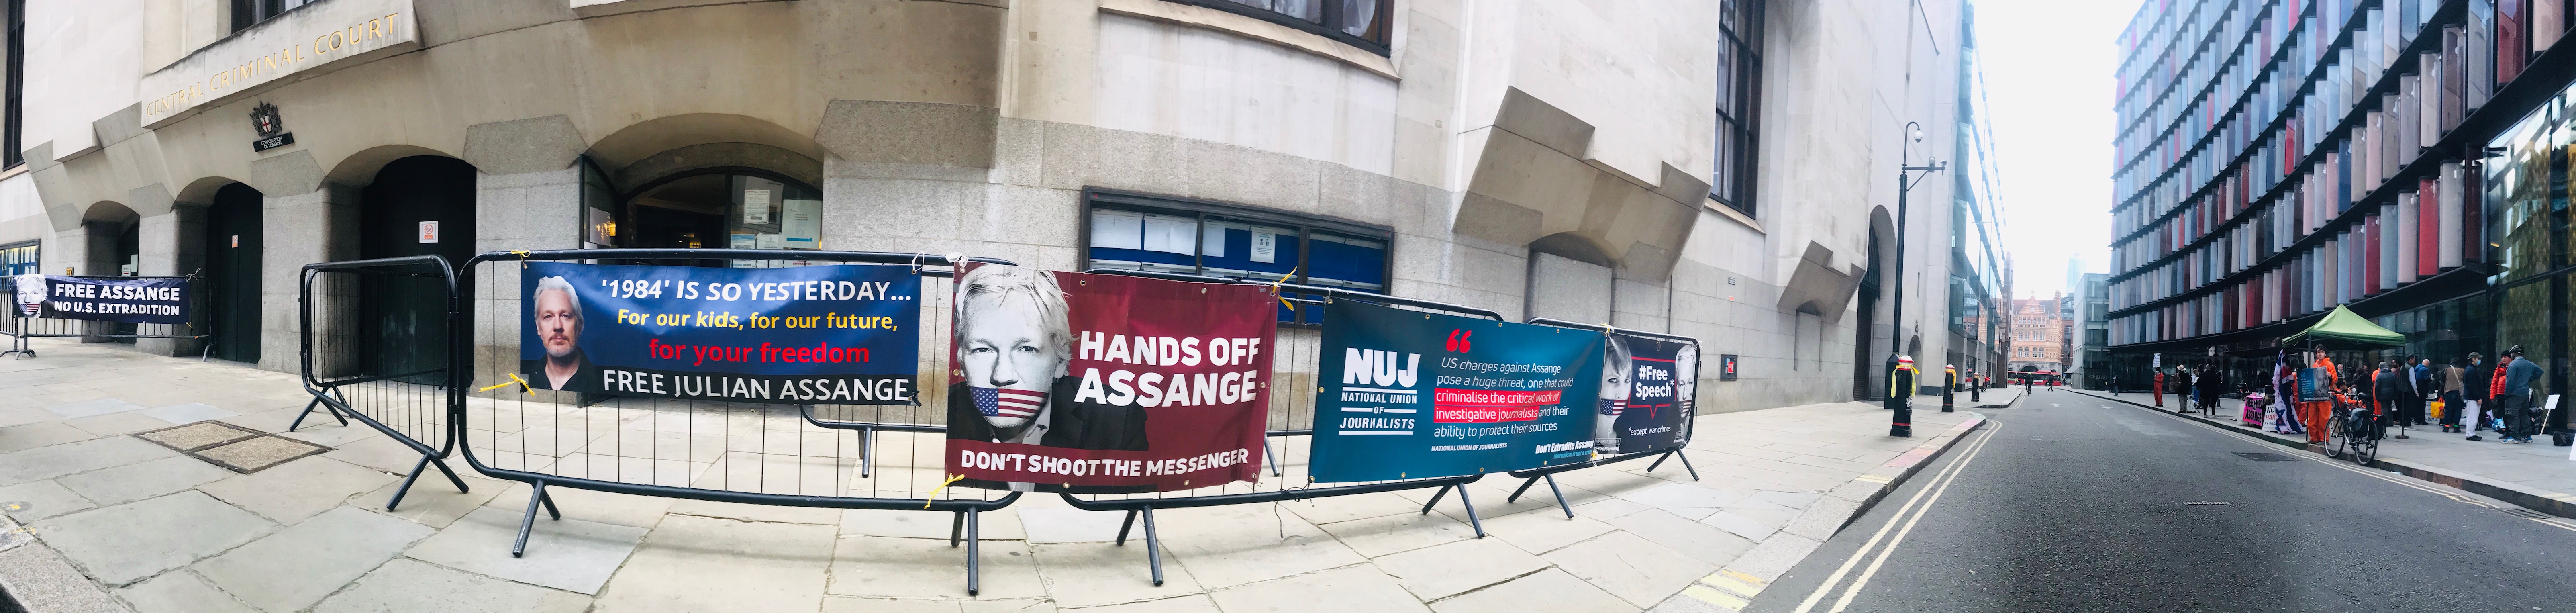 protest_photos:panoramic-banners-old-bailey-london-sept20.jpg